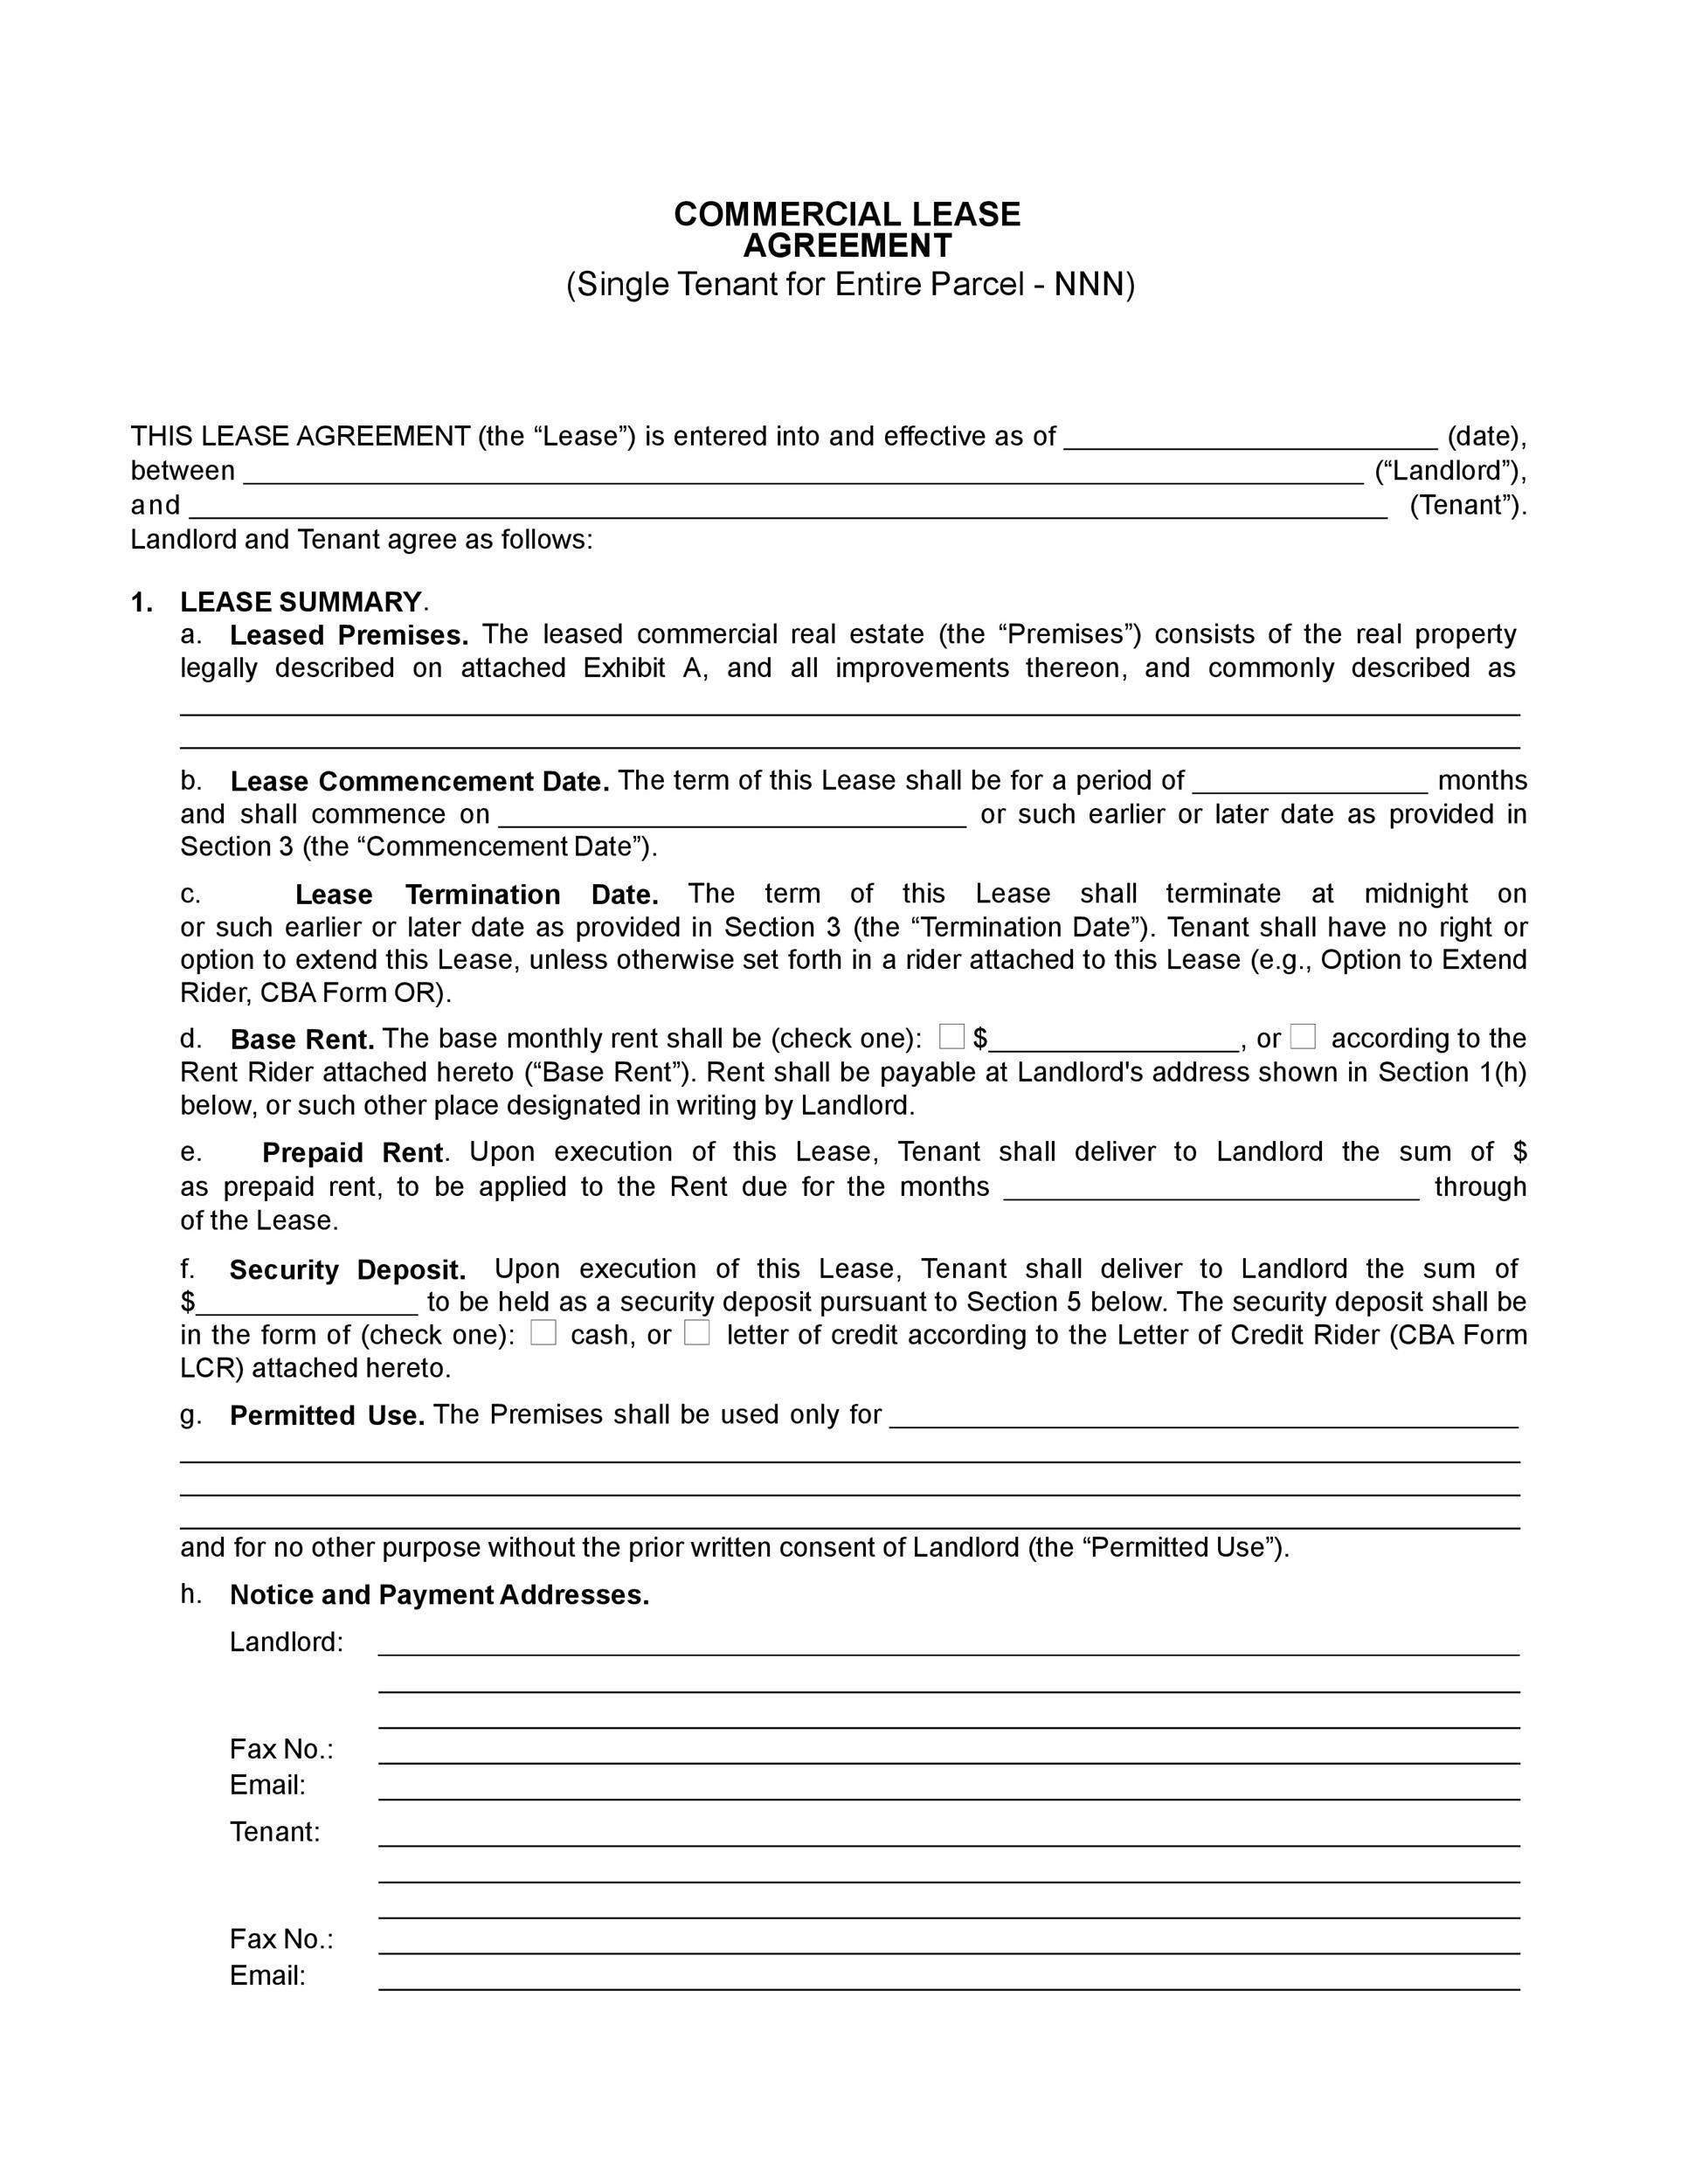 printable-commercial-lease-agreement-free-printable-templates